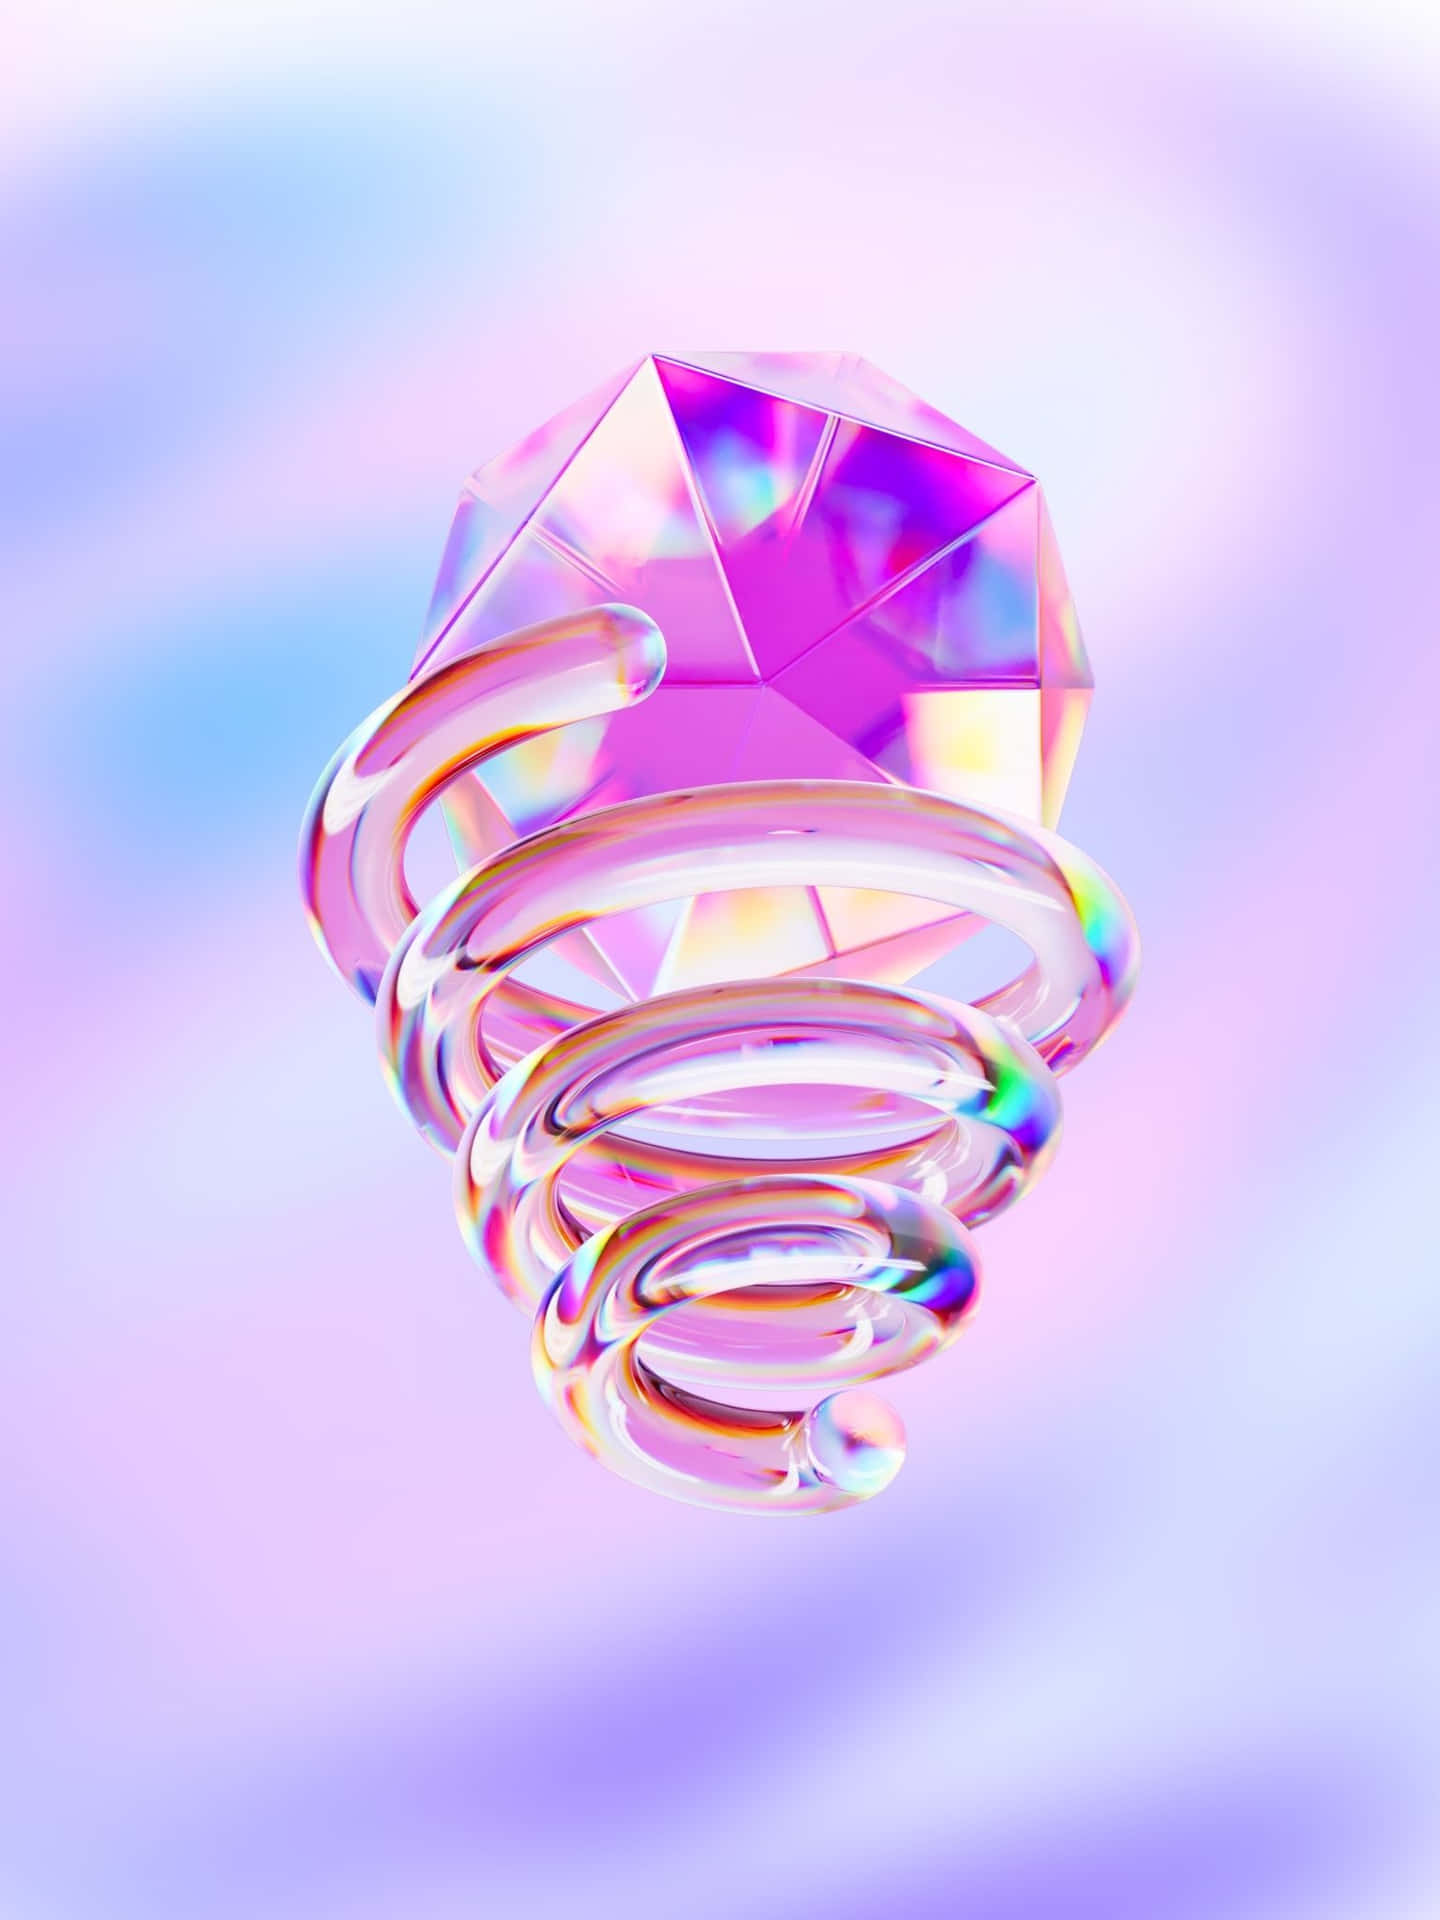 A Pink And Purple Spiral Ring On A Blue Background